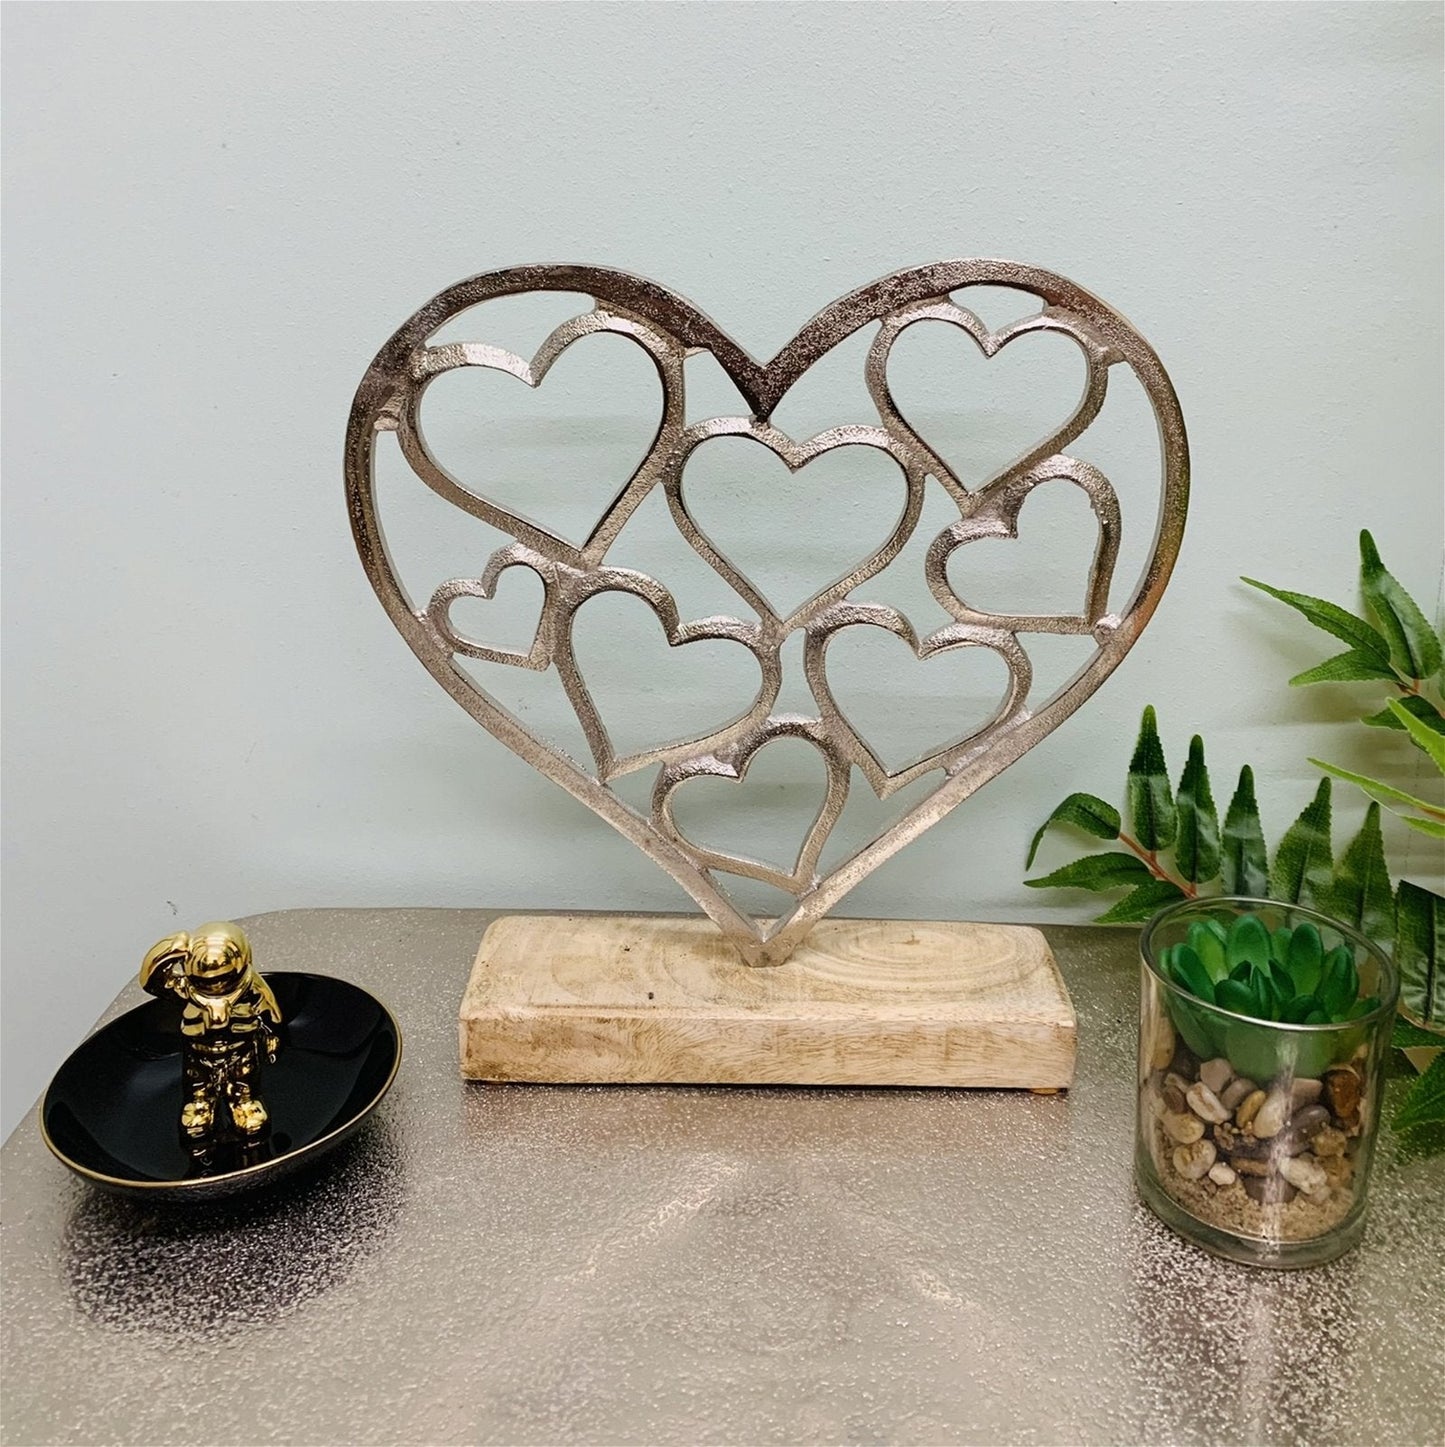 SILVER HEARTS ON A WOODEN BASE SMALL  from Eleanoras